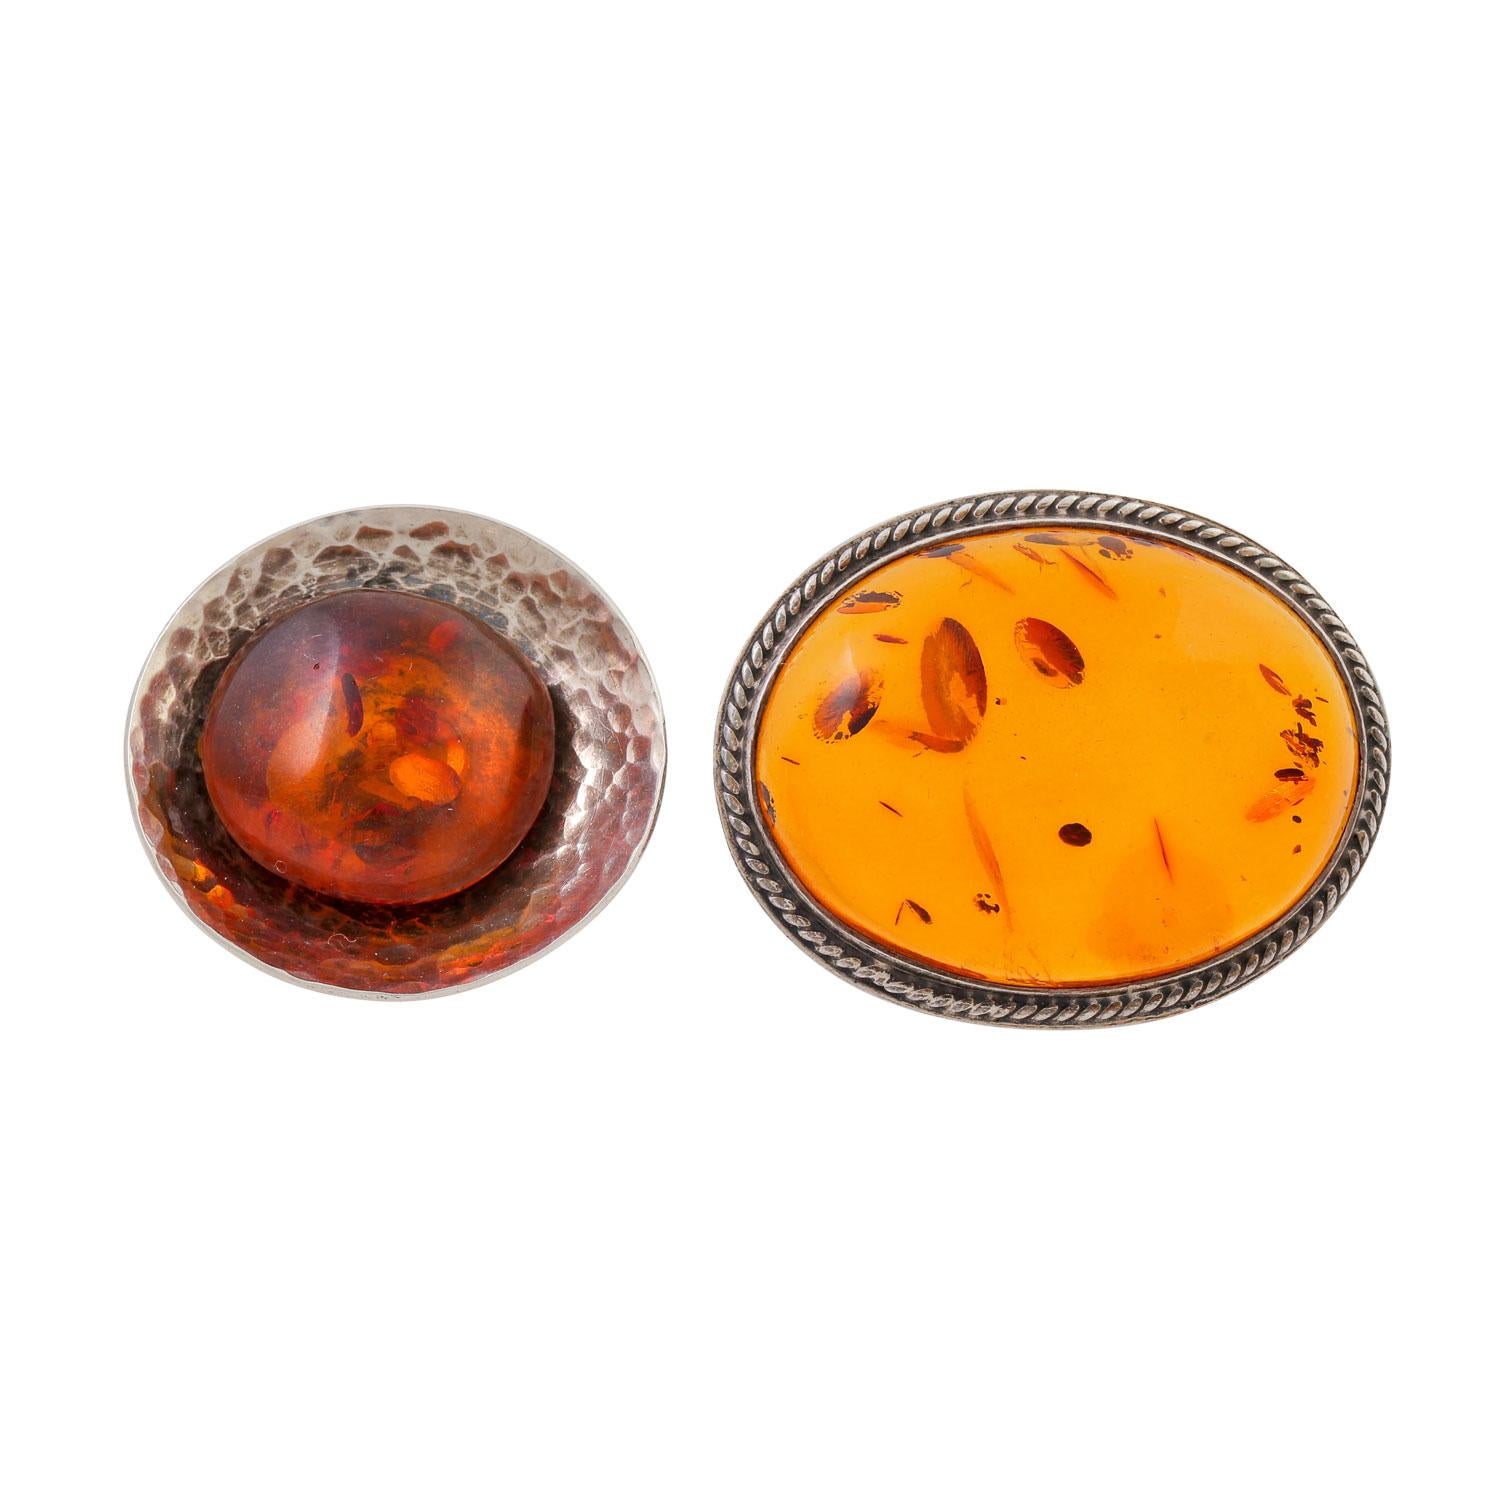 Women's Collection of 8 Parts of Amber Jewelry For Sale